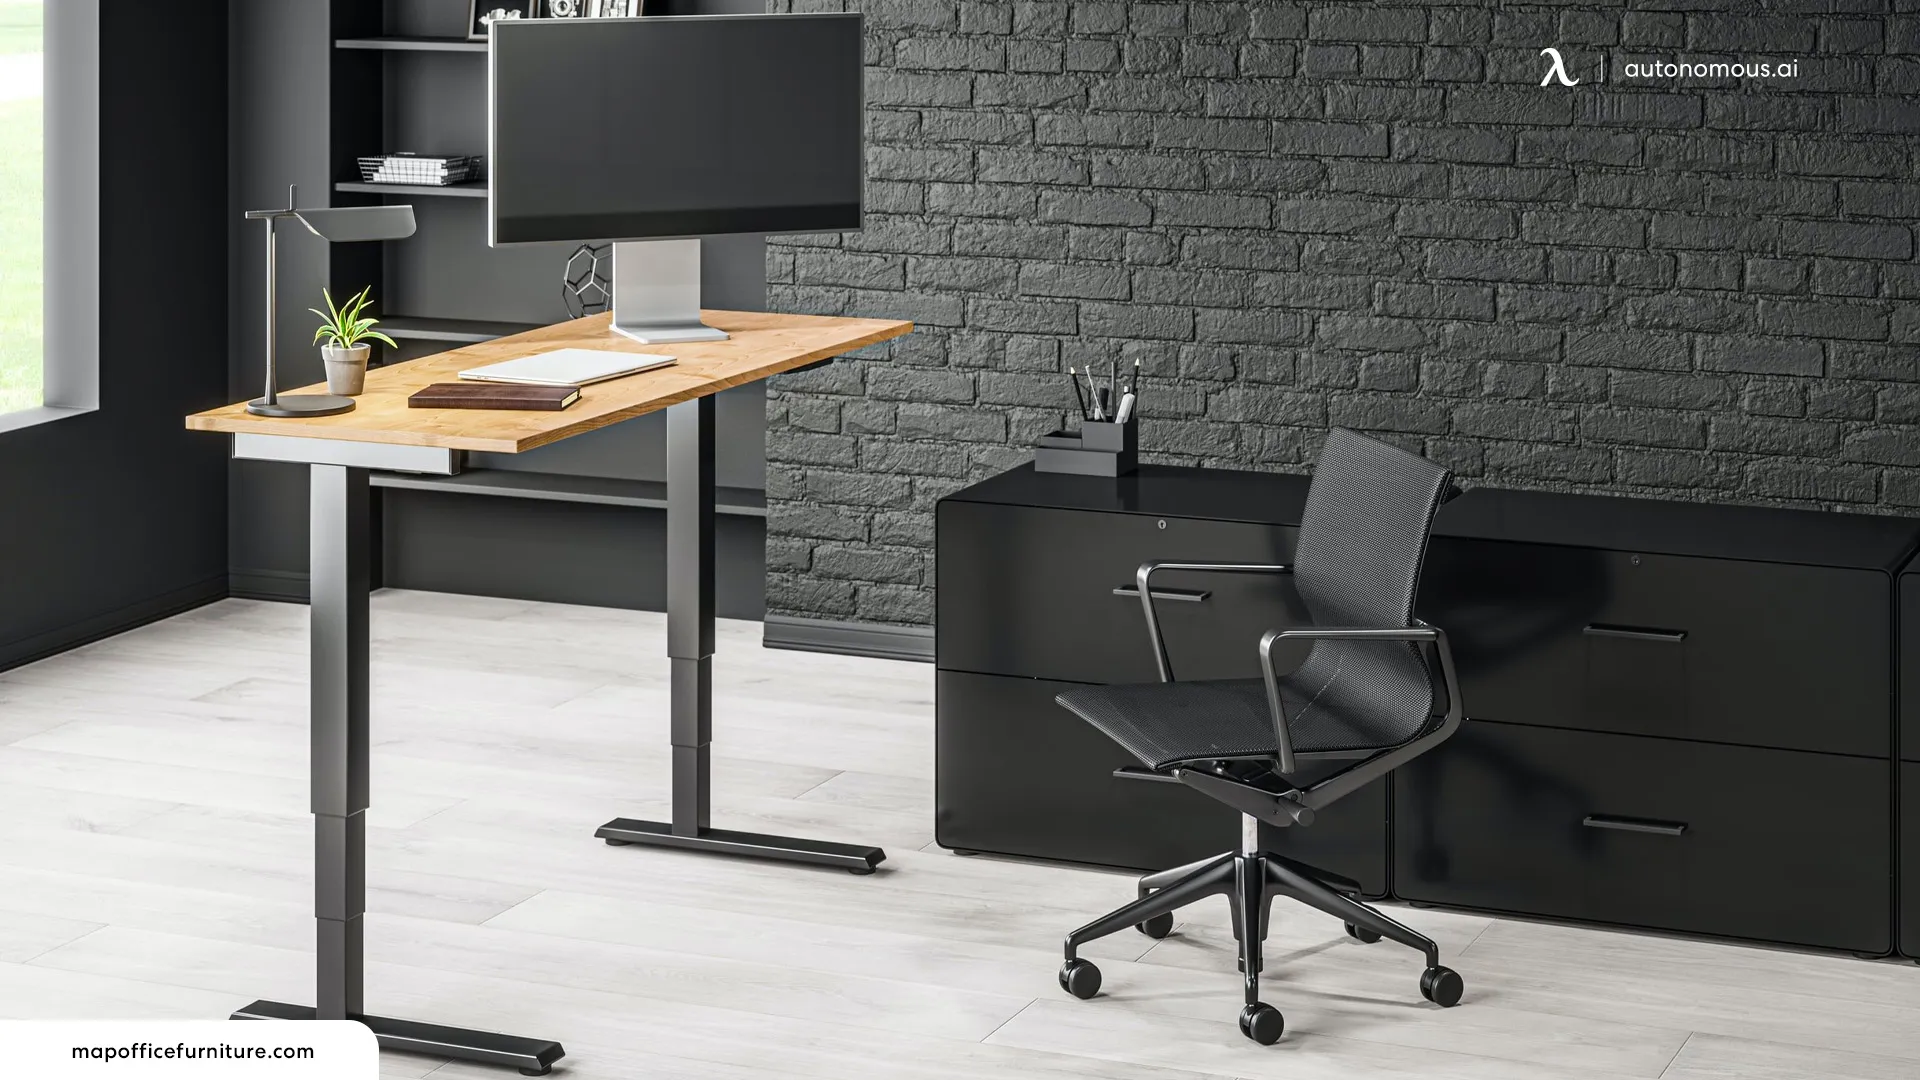 Map Office Furniture